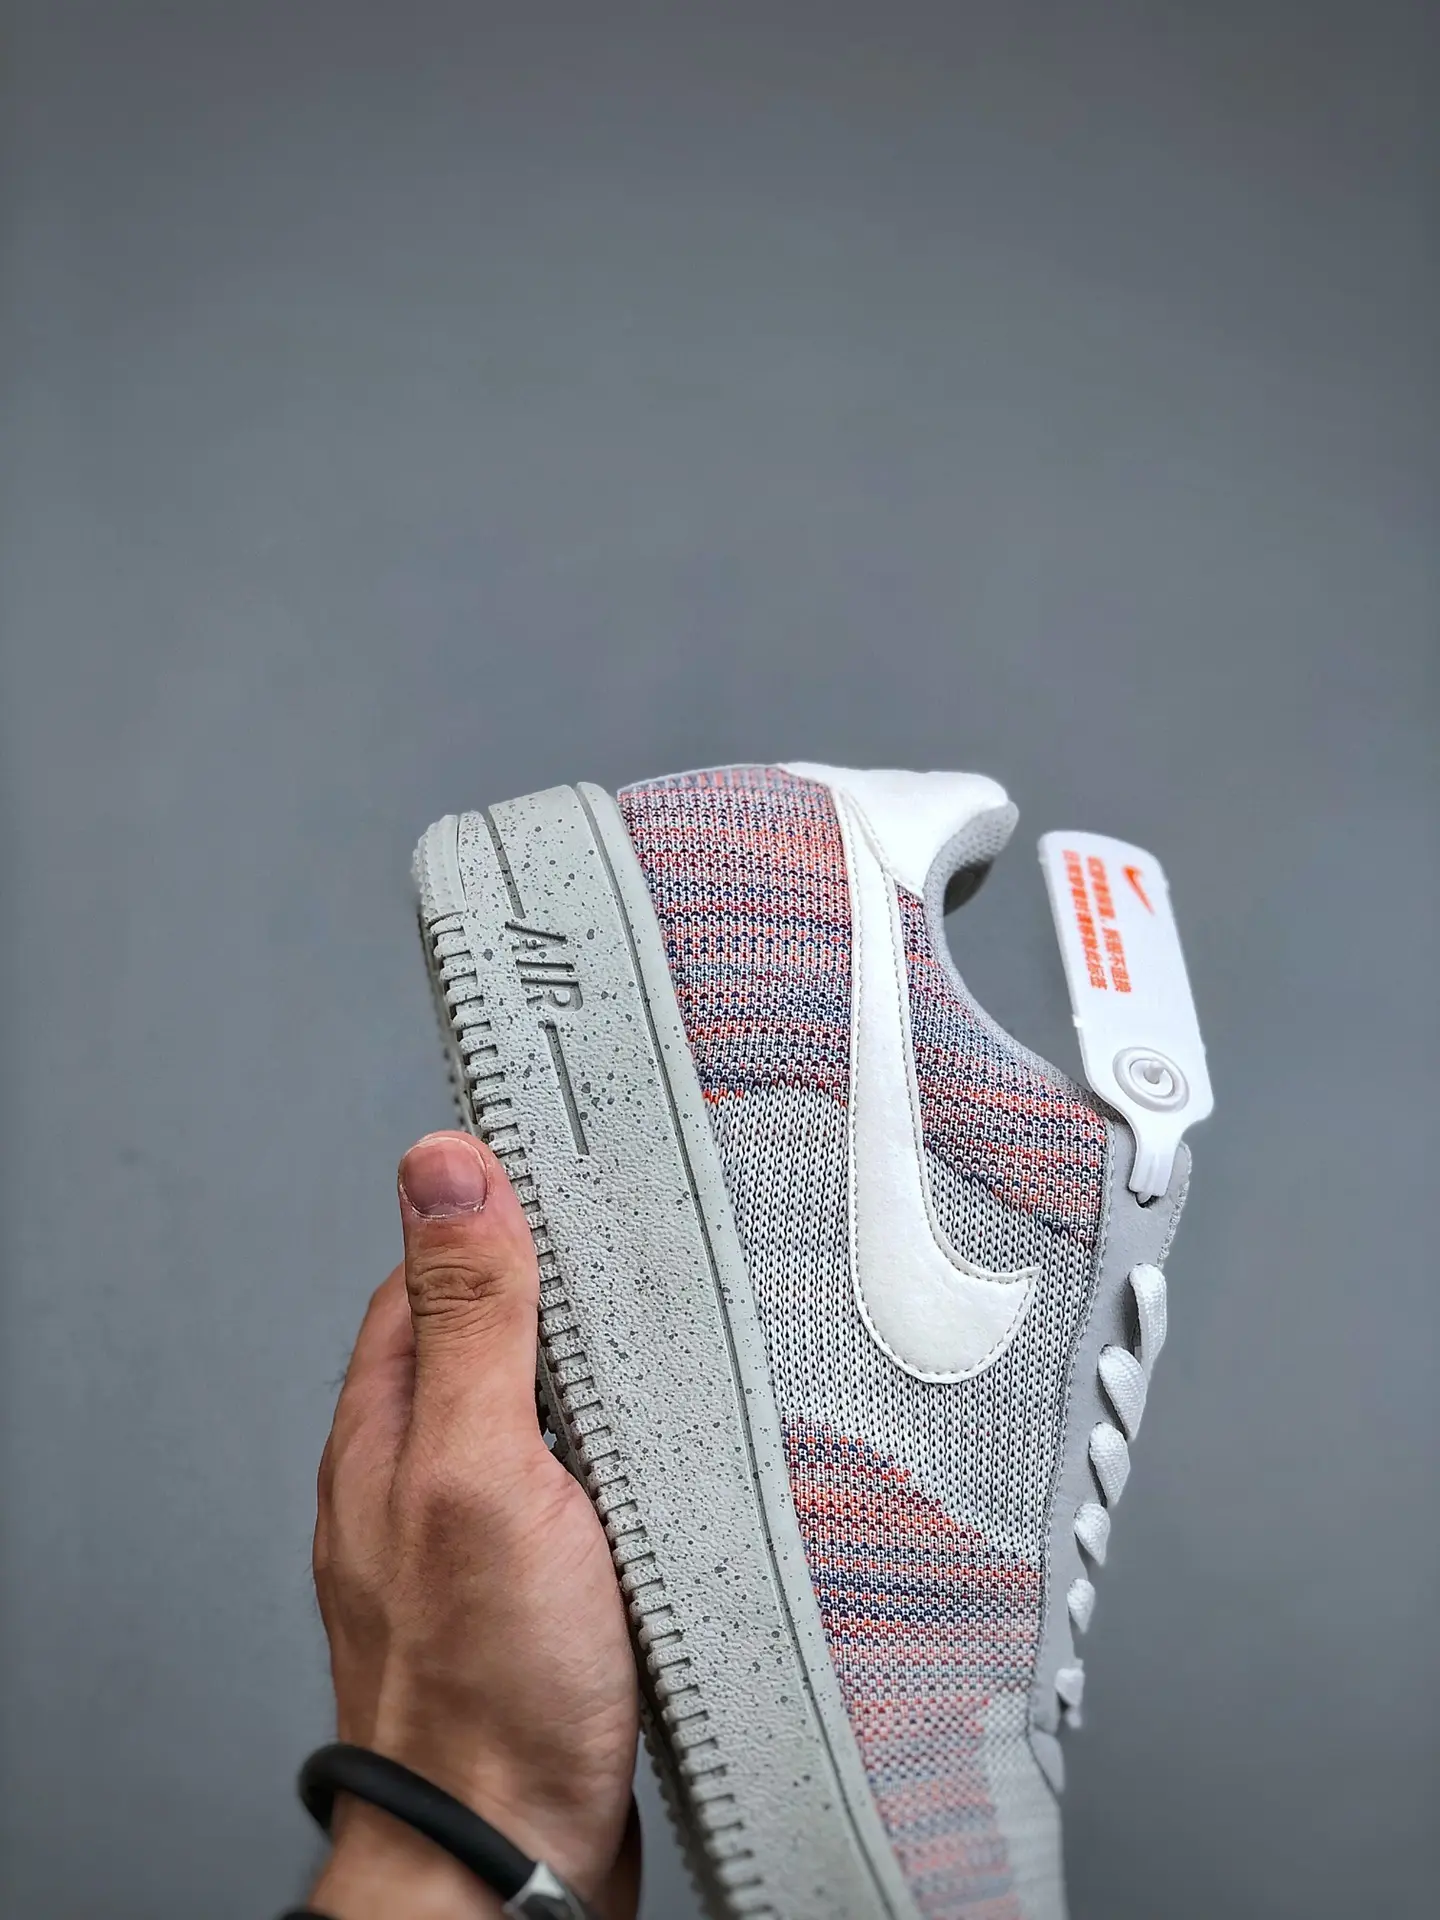 YASSW | Nike Air Force 1 Crater Flyknit sneakers Review